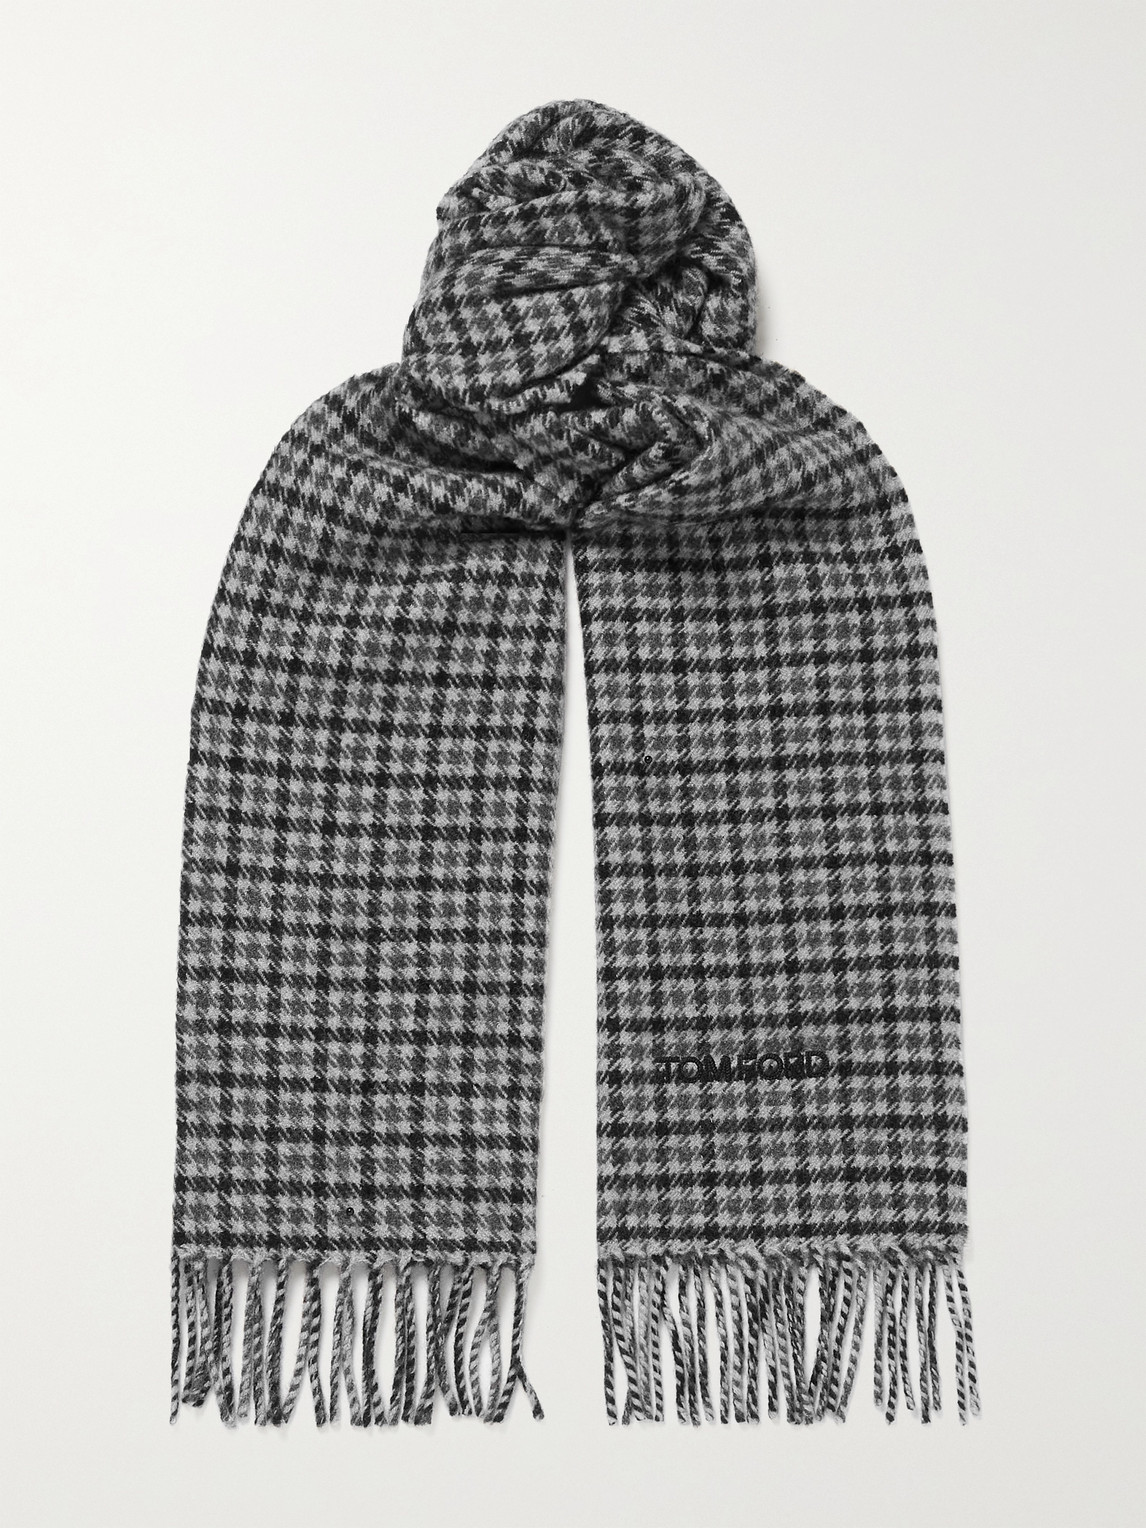 TOM FORD FRINGED HOUNDSTOOTH WOOL AND CASHMERE-BLEND SCARF